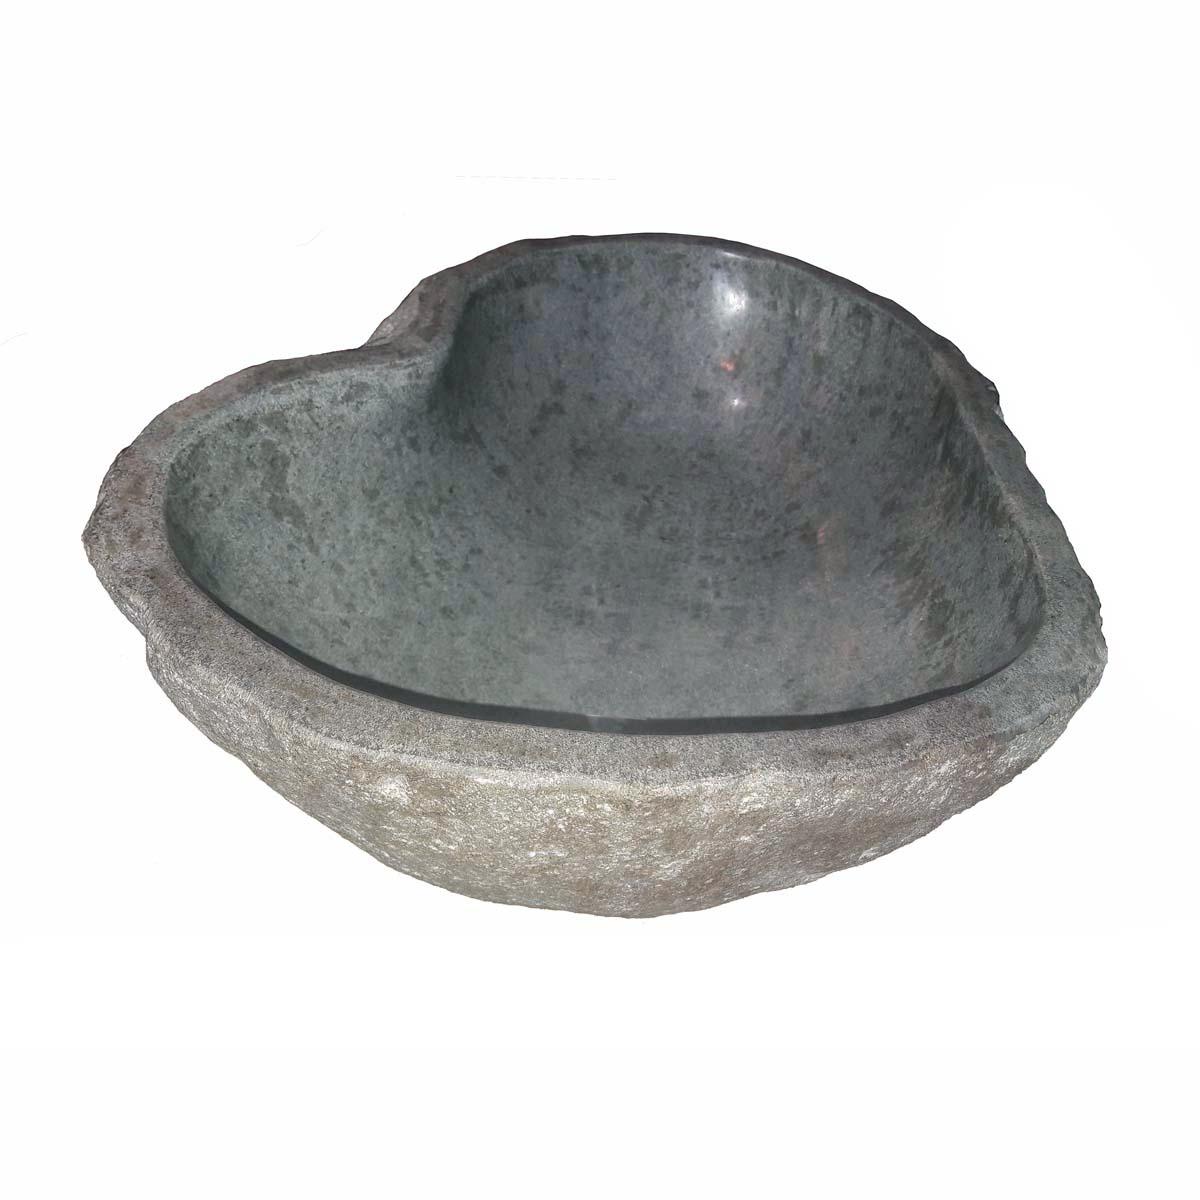 Late 20th Century River Stone Basin or Sink from Indonesia